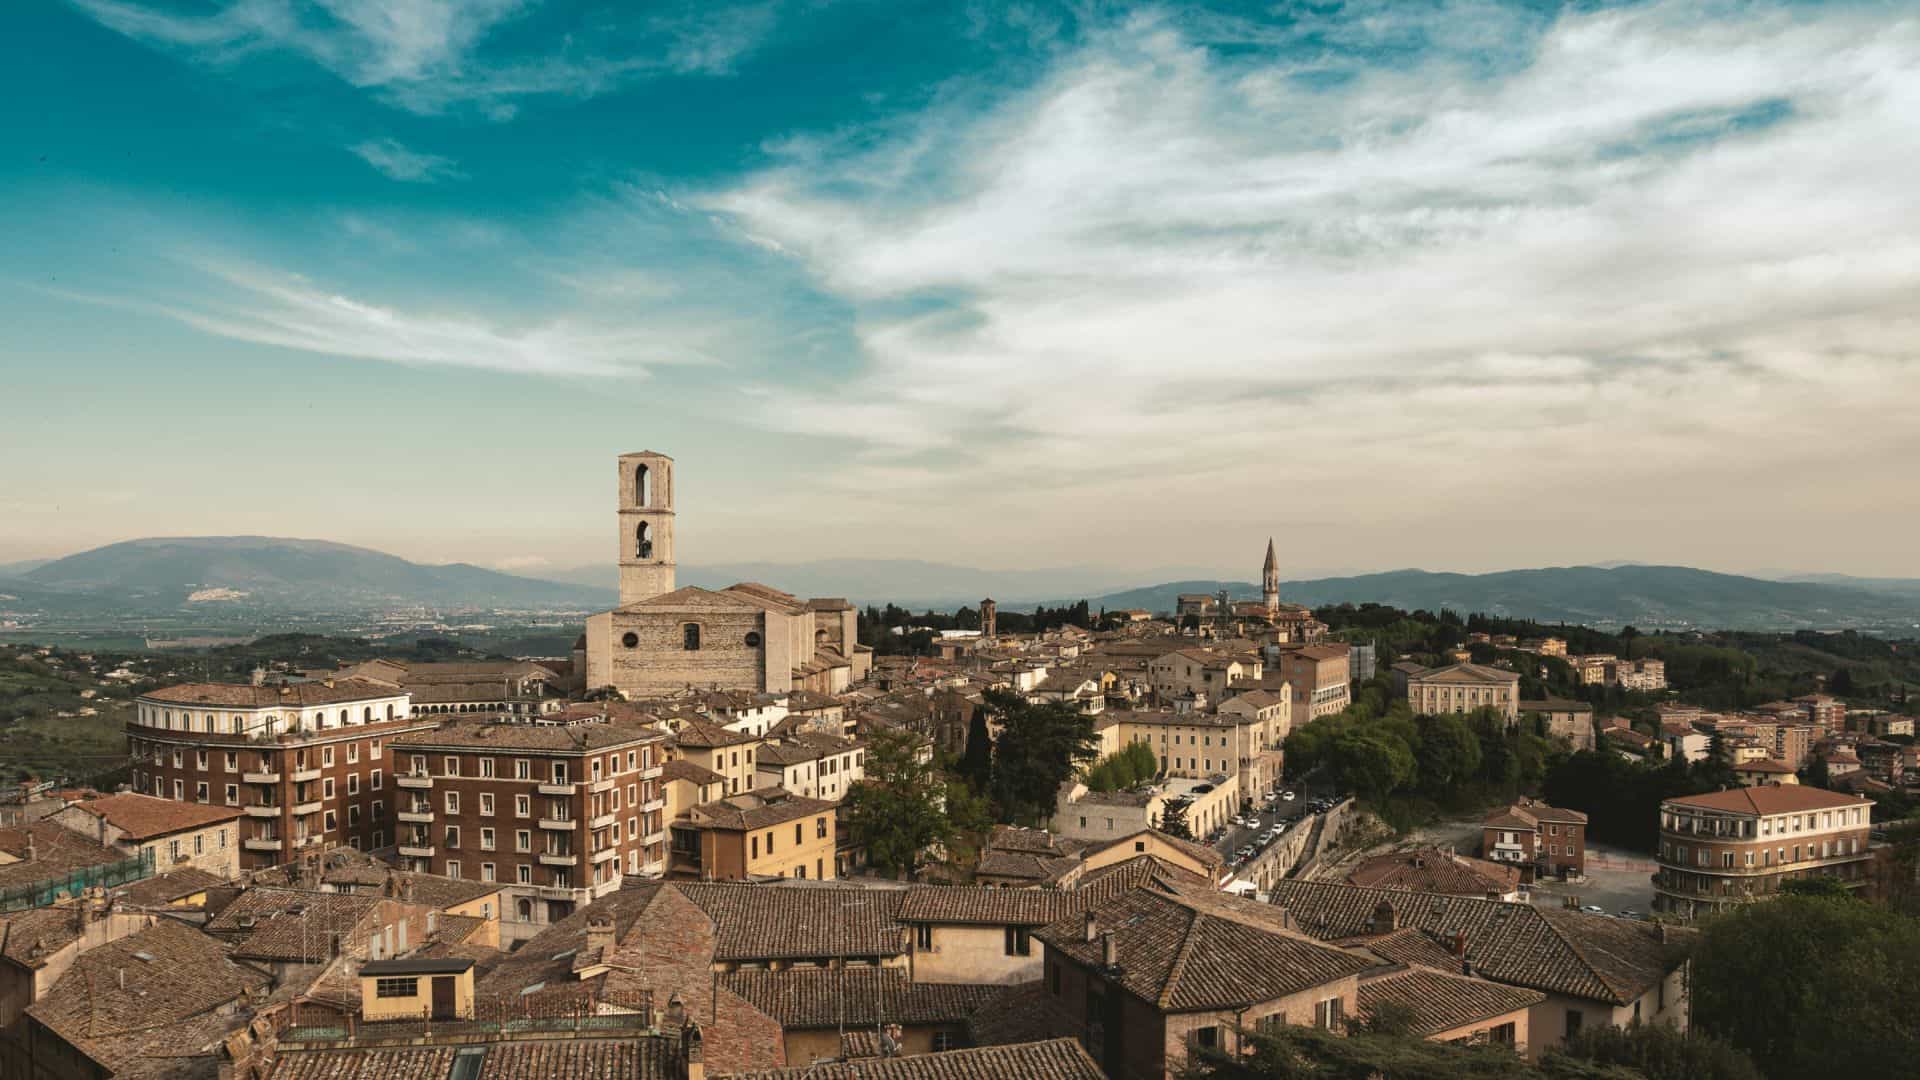 View from above of the city of Perugia